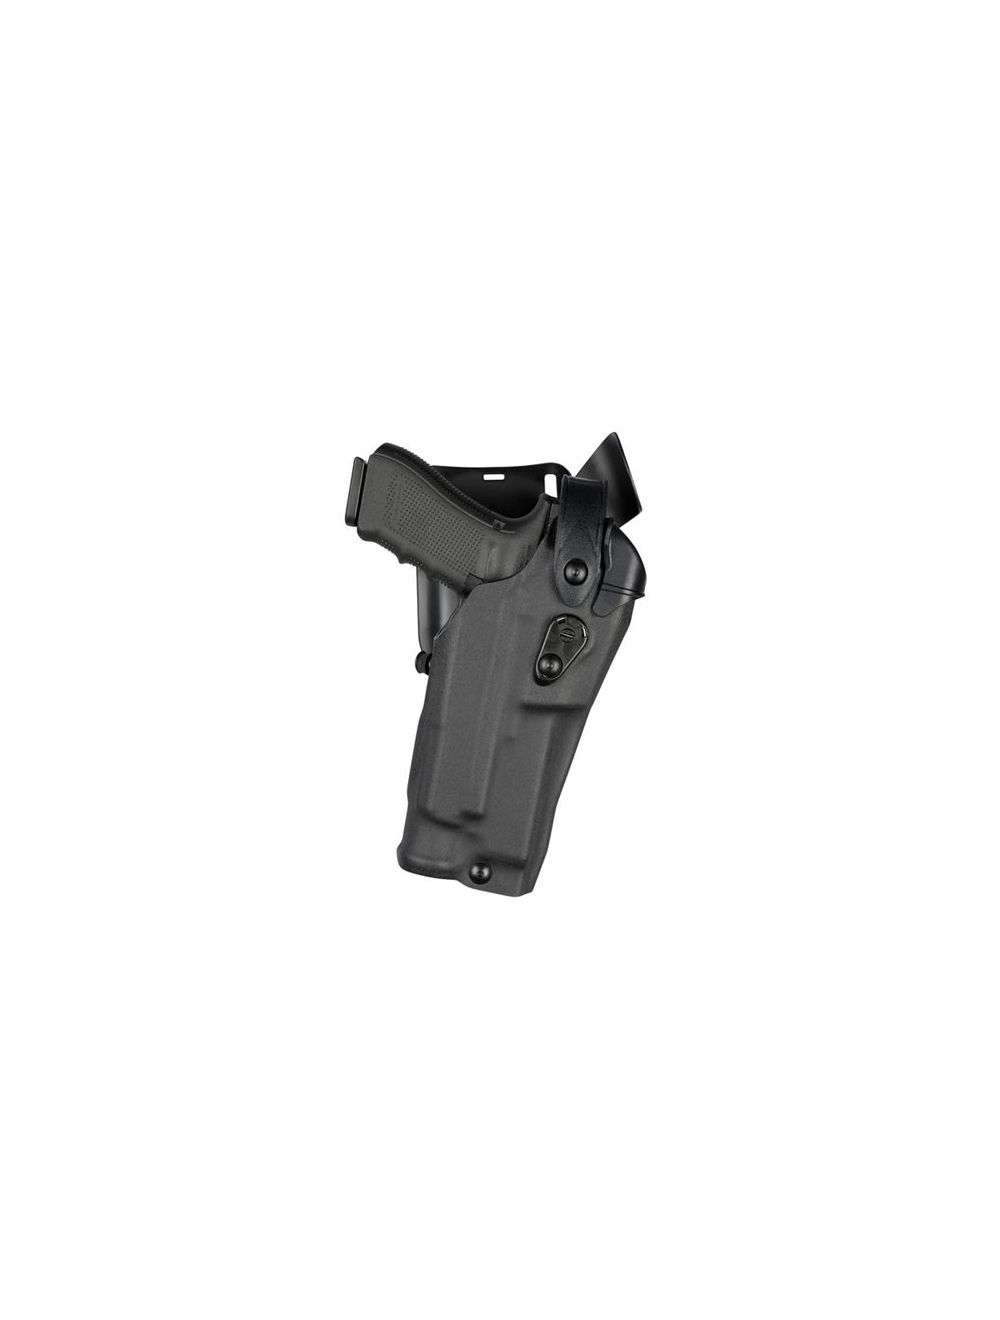 Model 6365RDS ALS/SLS Low-Ride, Level III Retention Duty Holster for Glock 34 MOS w/ Light